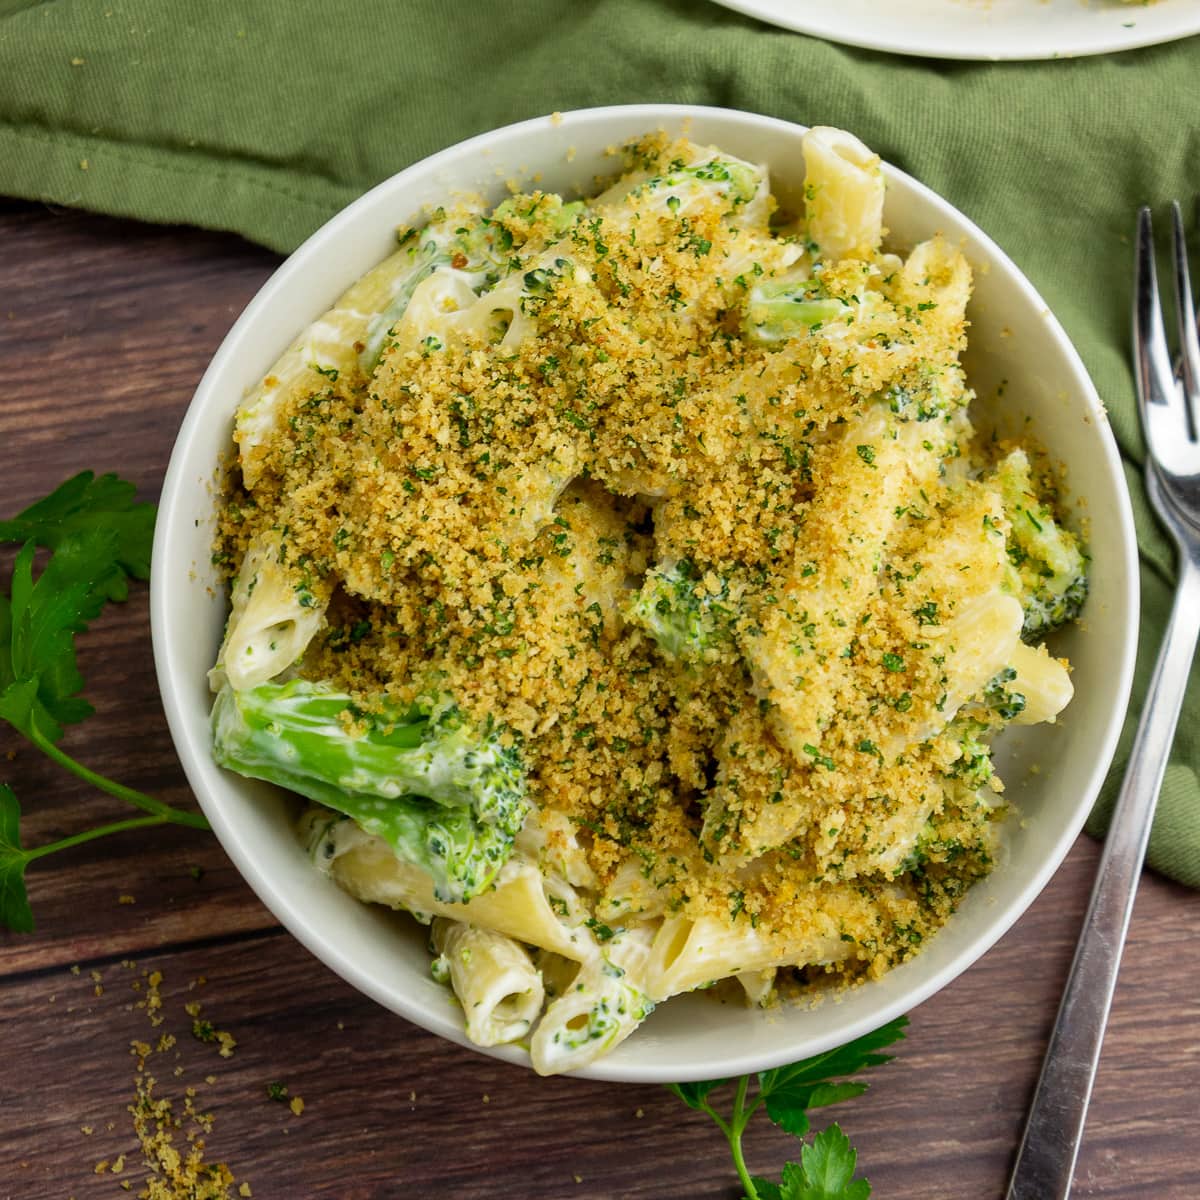 a bowl of creamy pasta with broccoli and breadcrumbs.